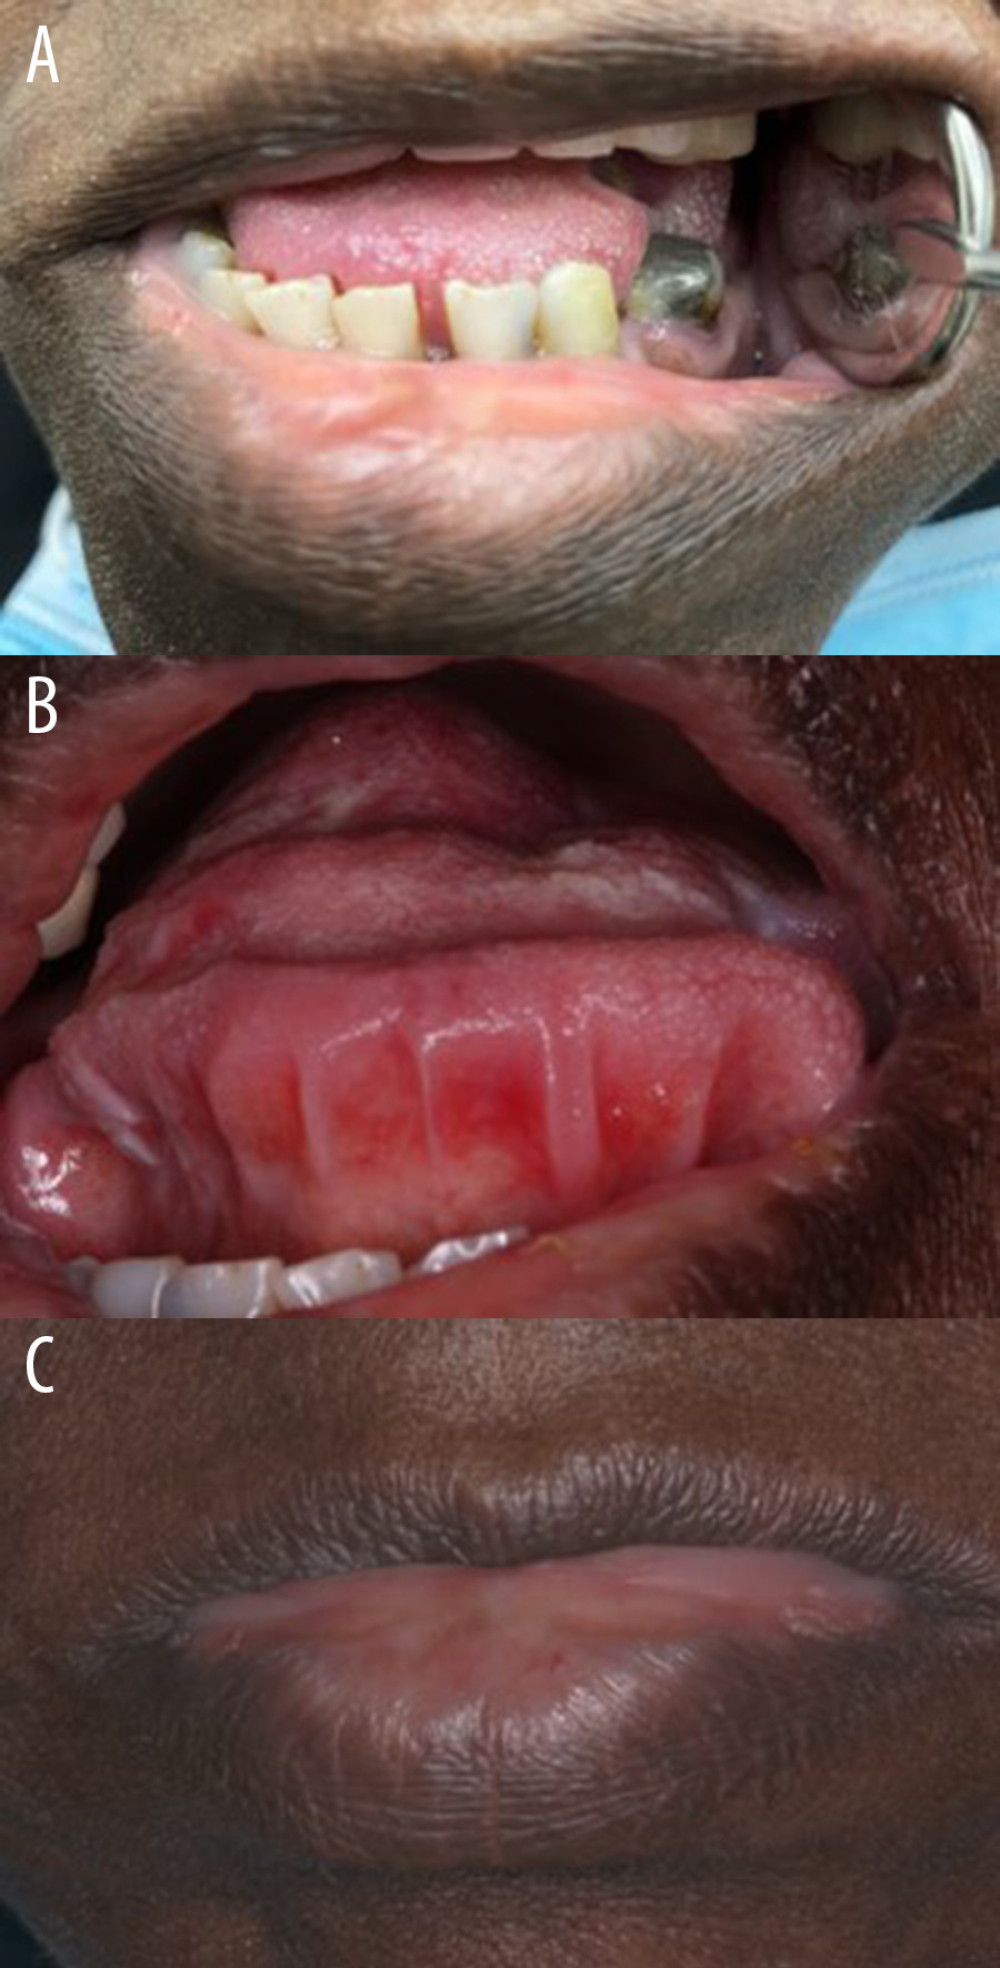 Clinical images of the tongue after 6 months of intralesional triamcinolone injections, showing reduced tongue size (A) and wider oral cavity space in which the palate can be seen (B) as well as the less prominent lower lip (C).